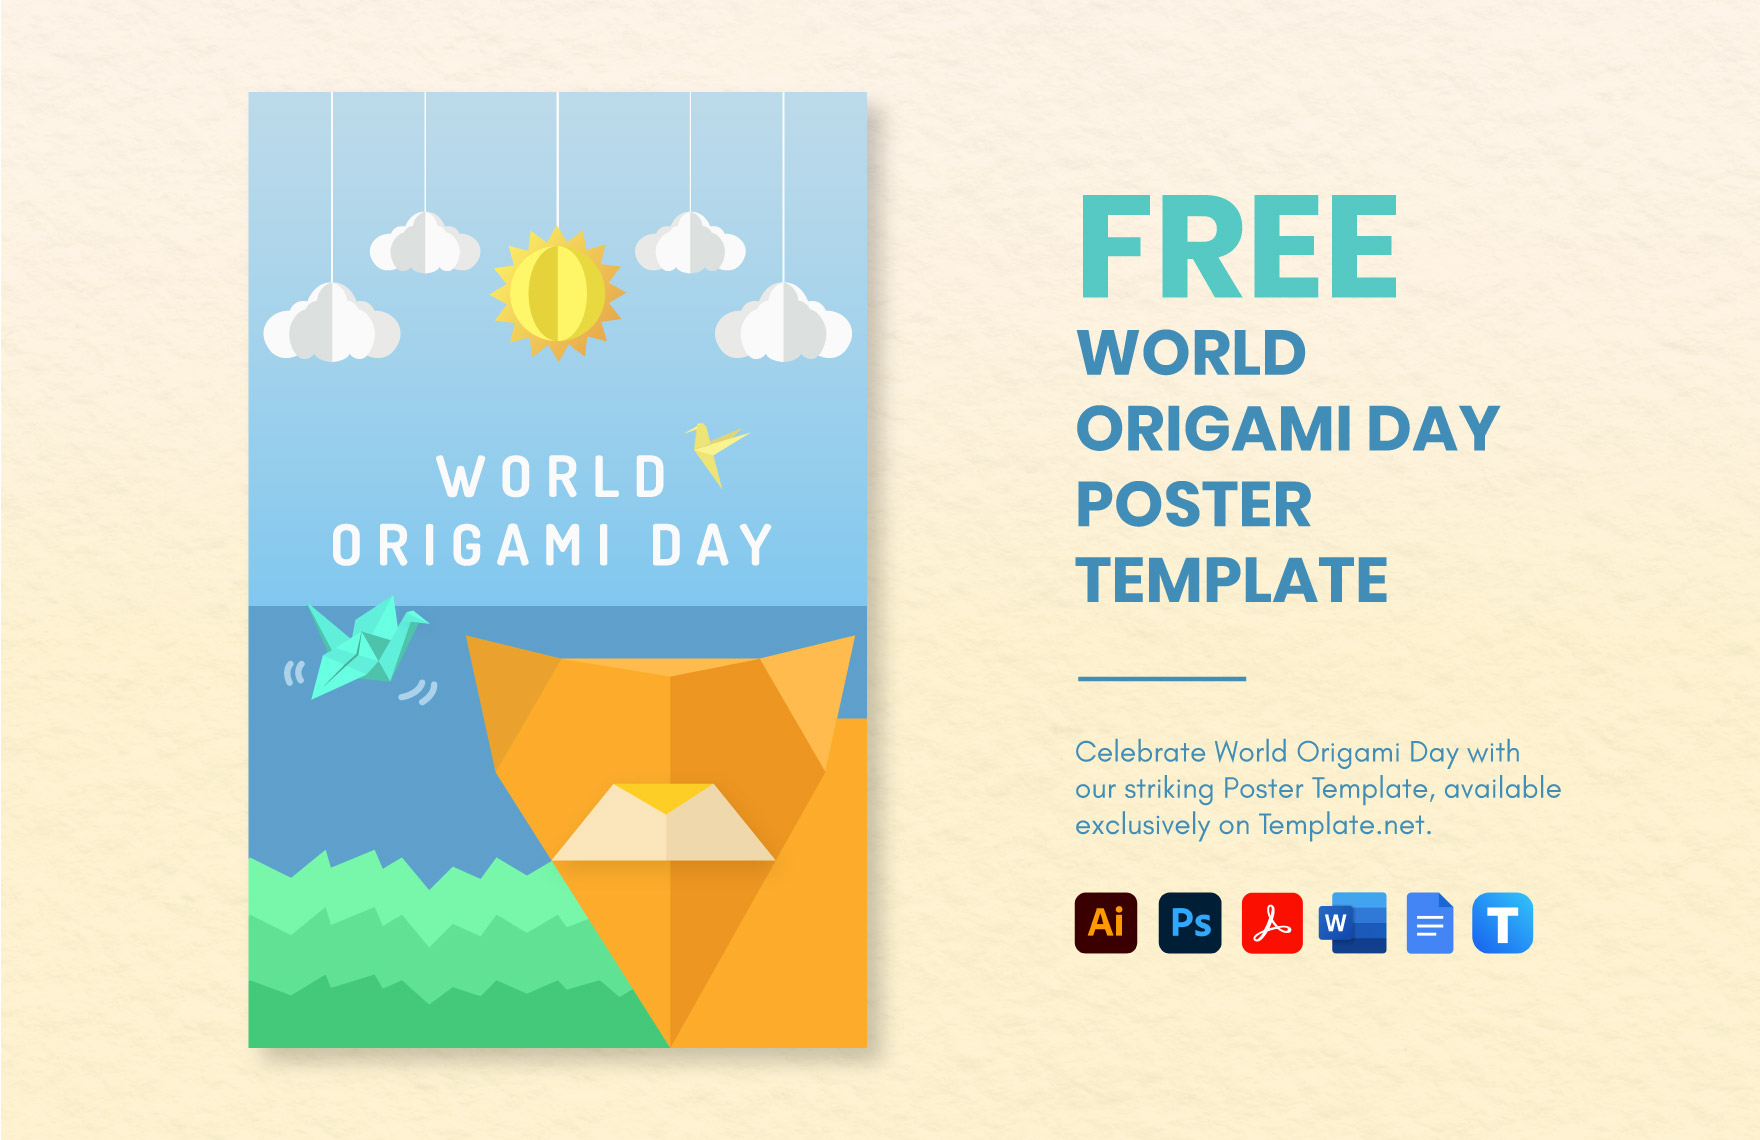 World Origami Day Poster Template